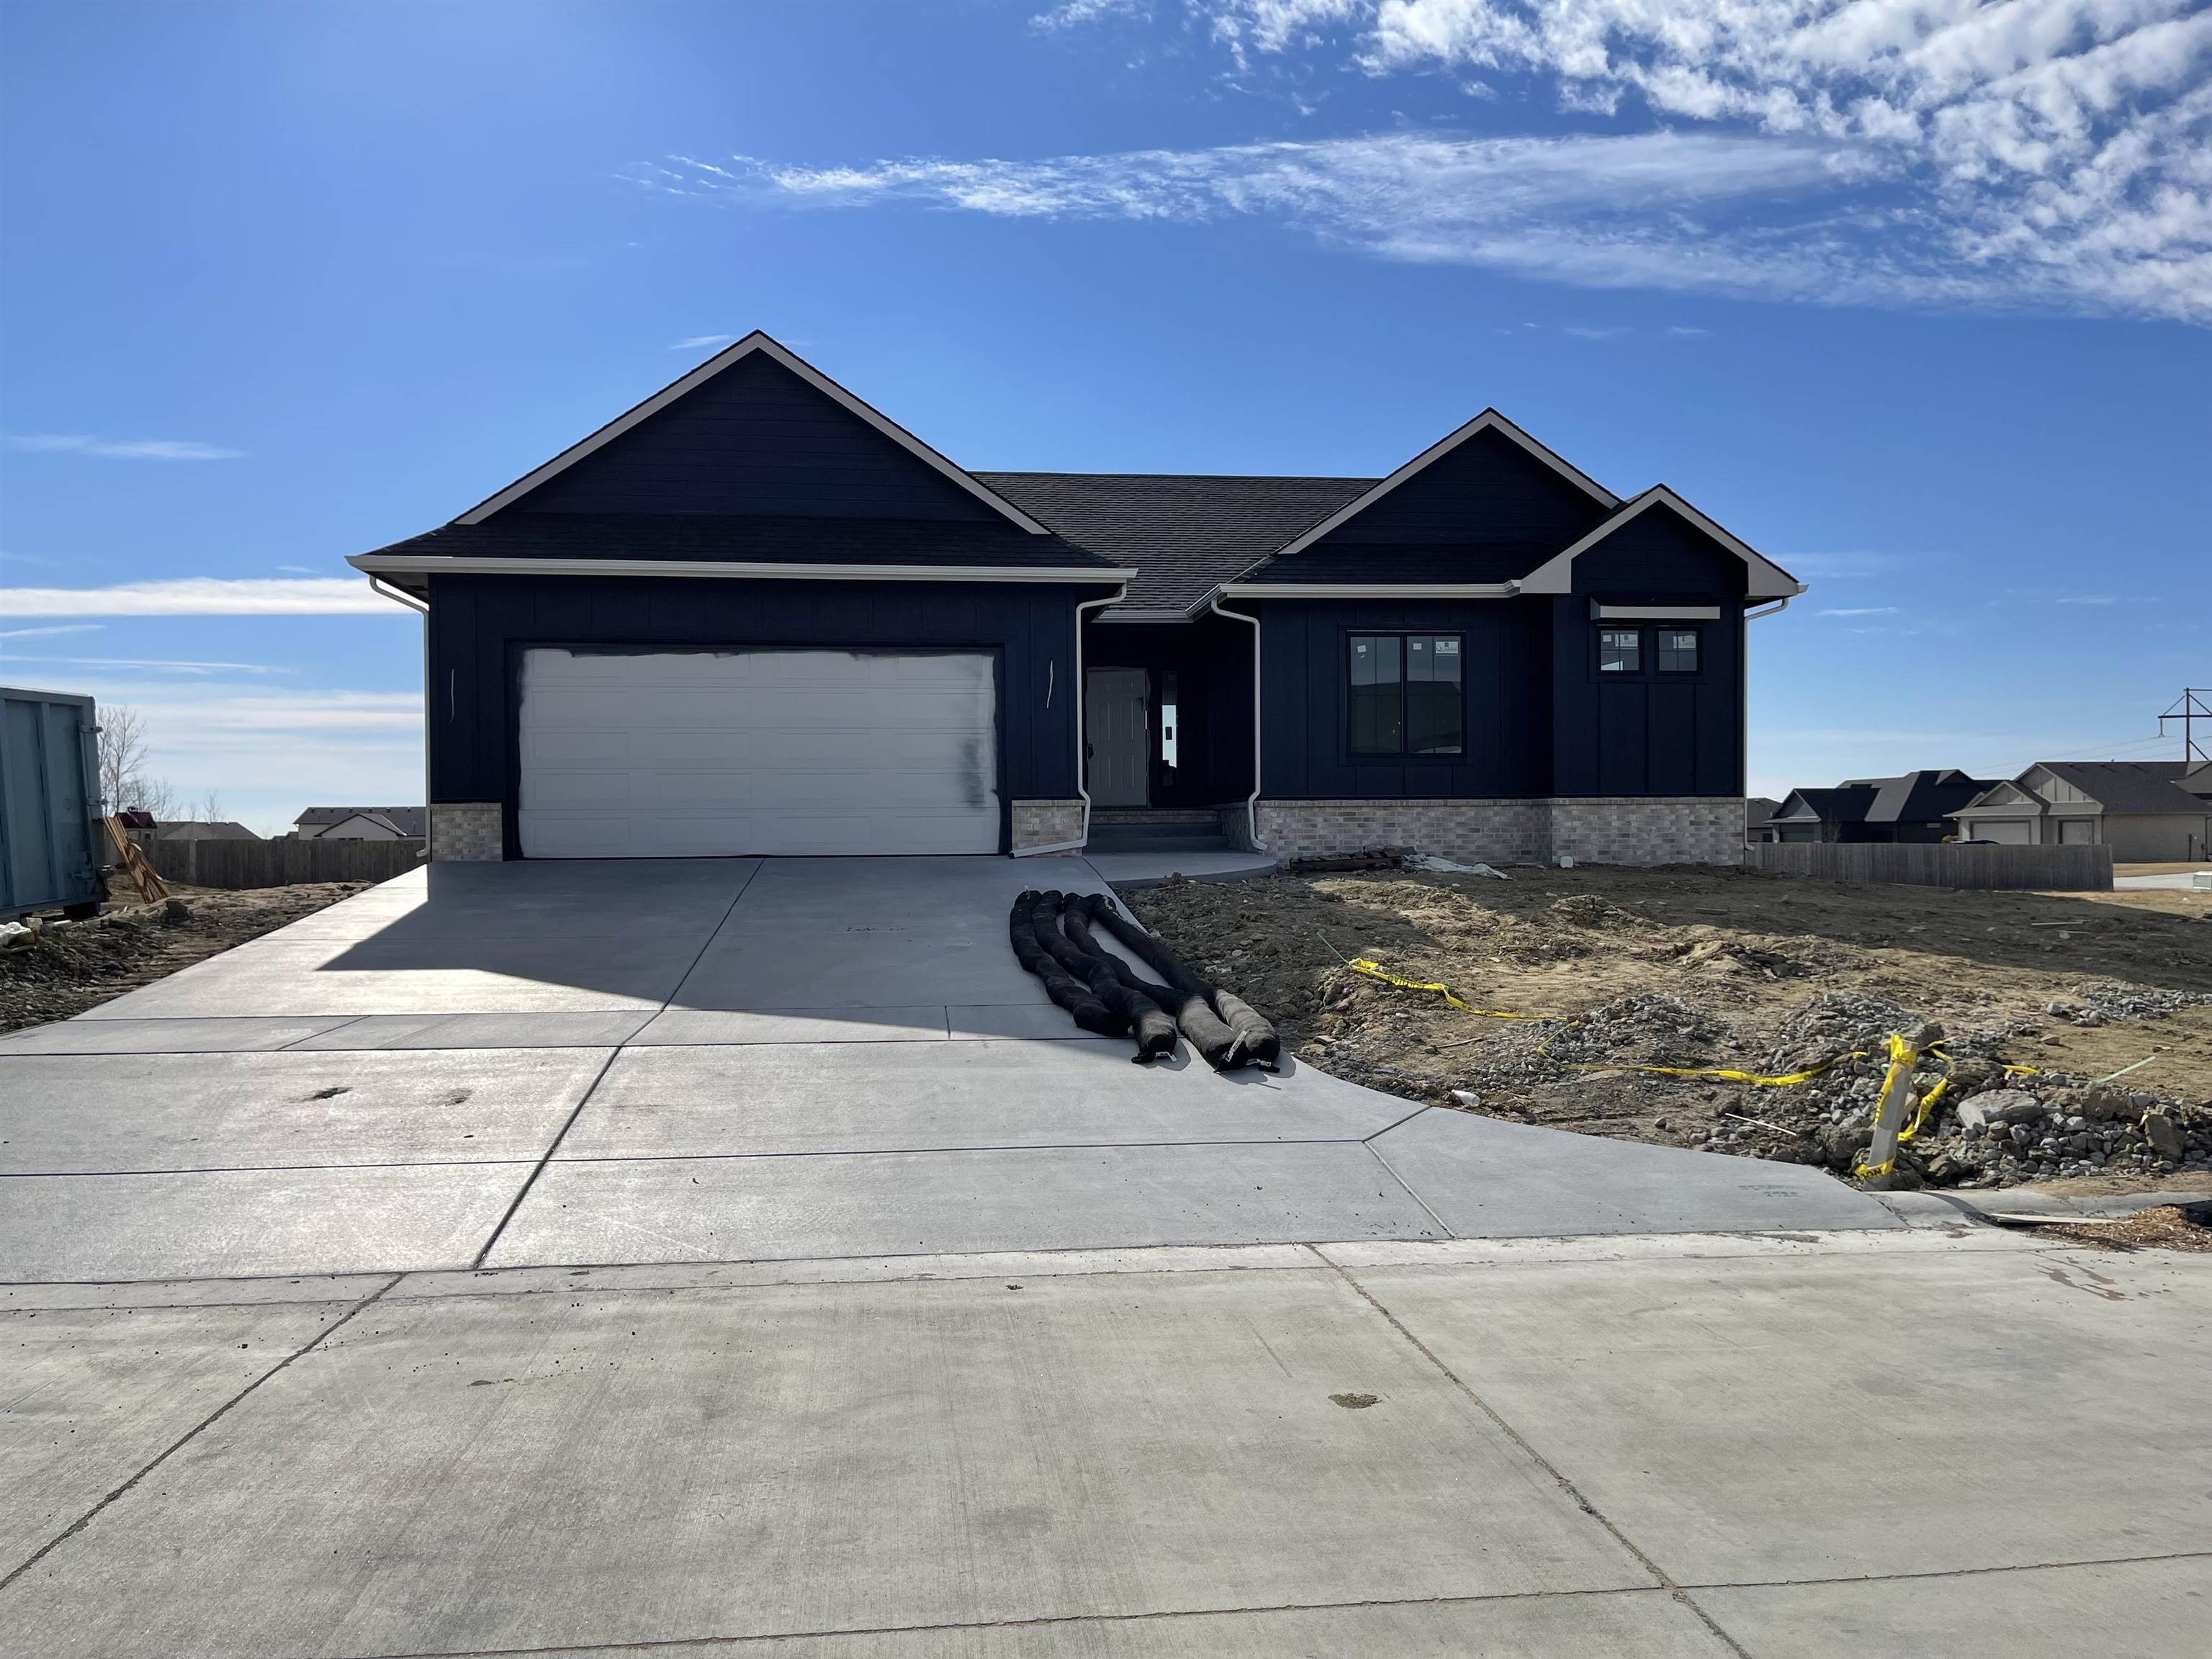 Welcome to 7169 E. Pheasant Ridge! This new home packs in many great amenities and features, and is 